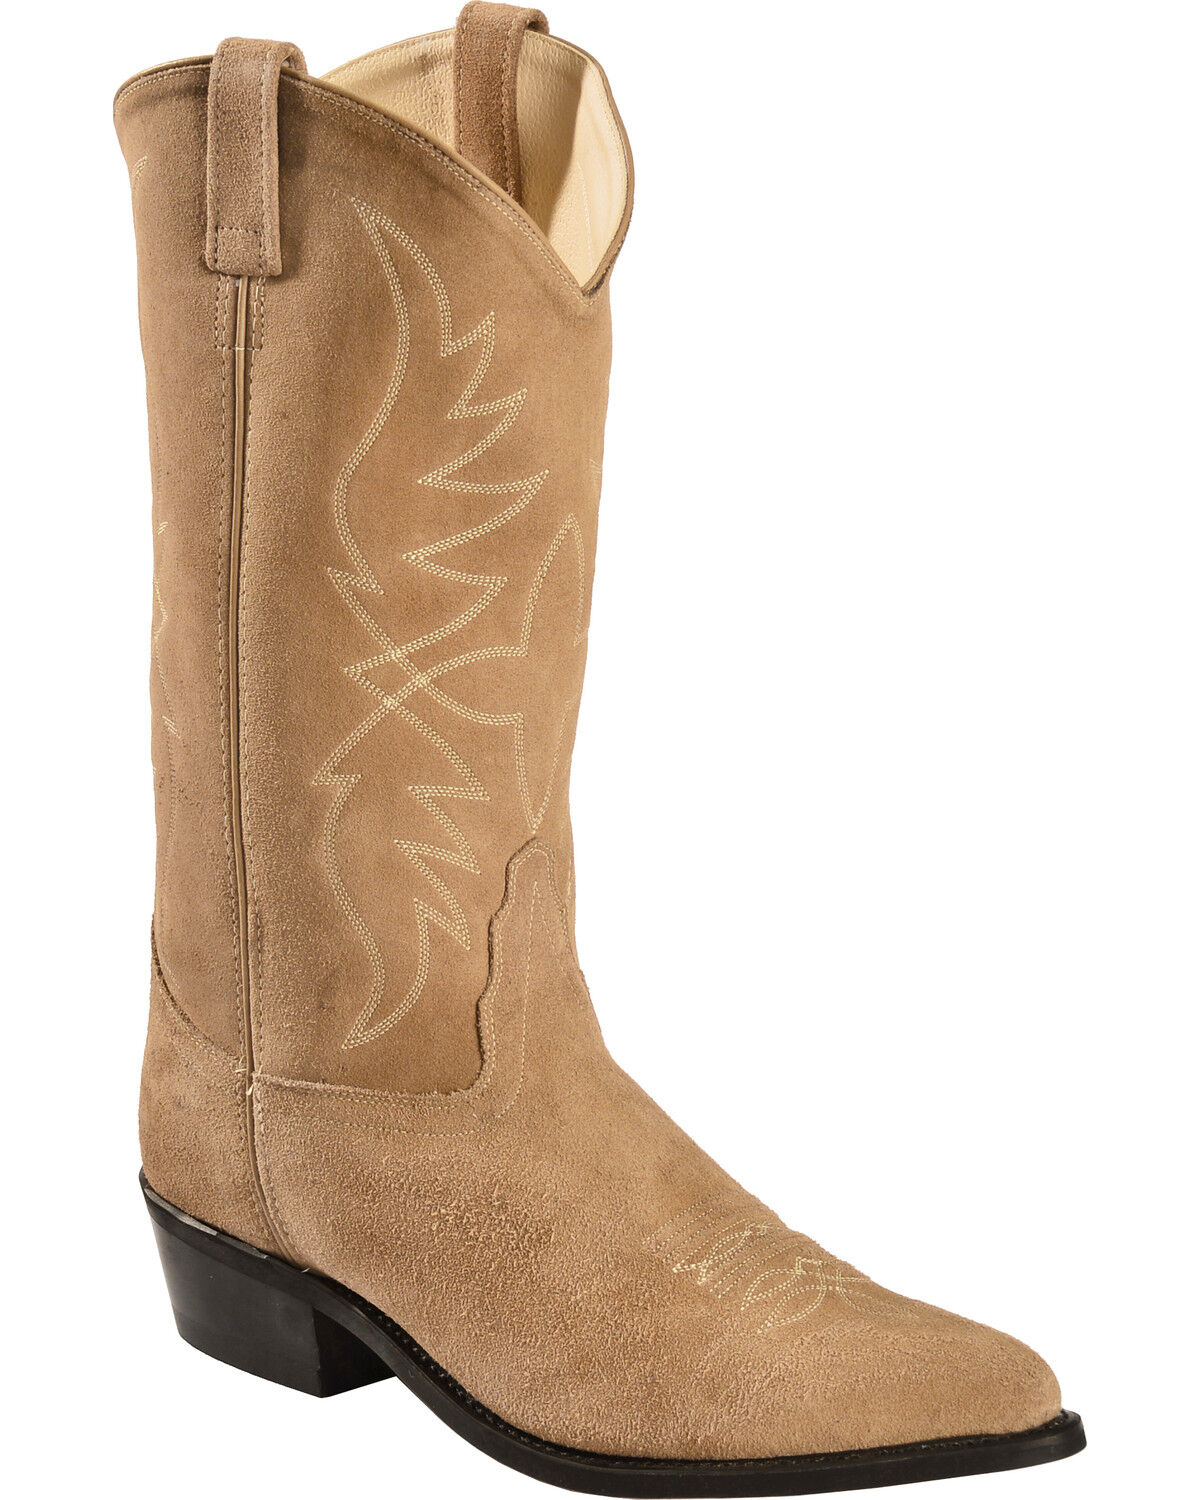 Old West Roughout Suede Cowboy Boots 